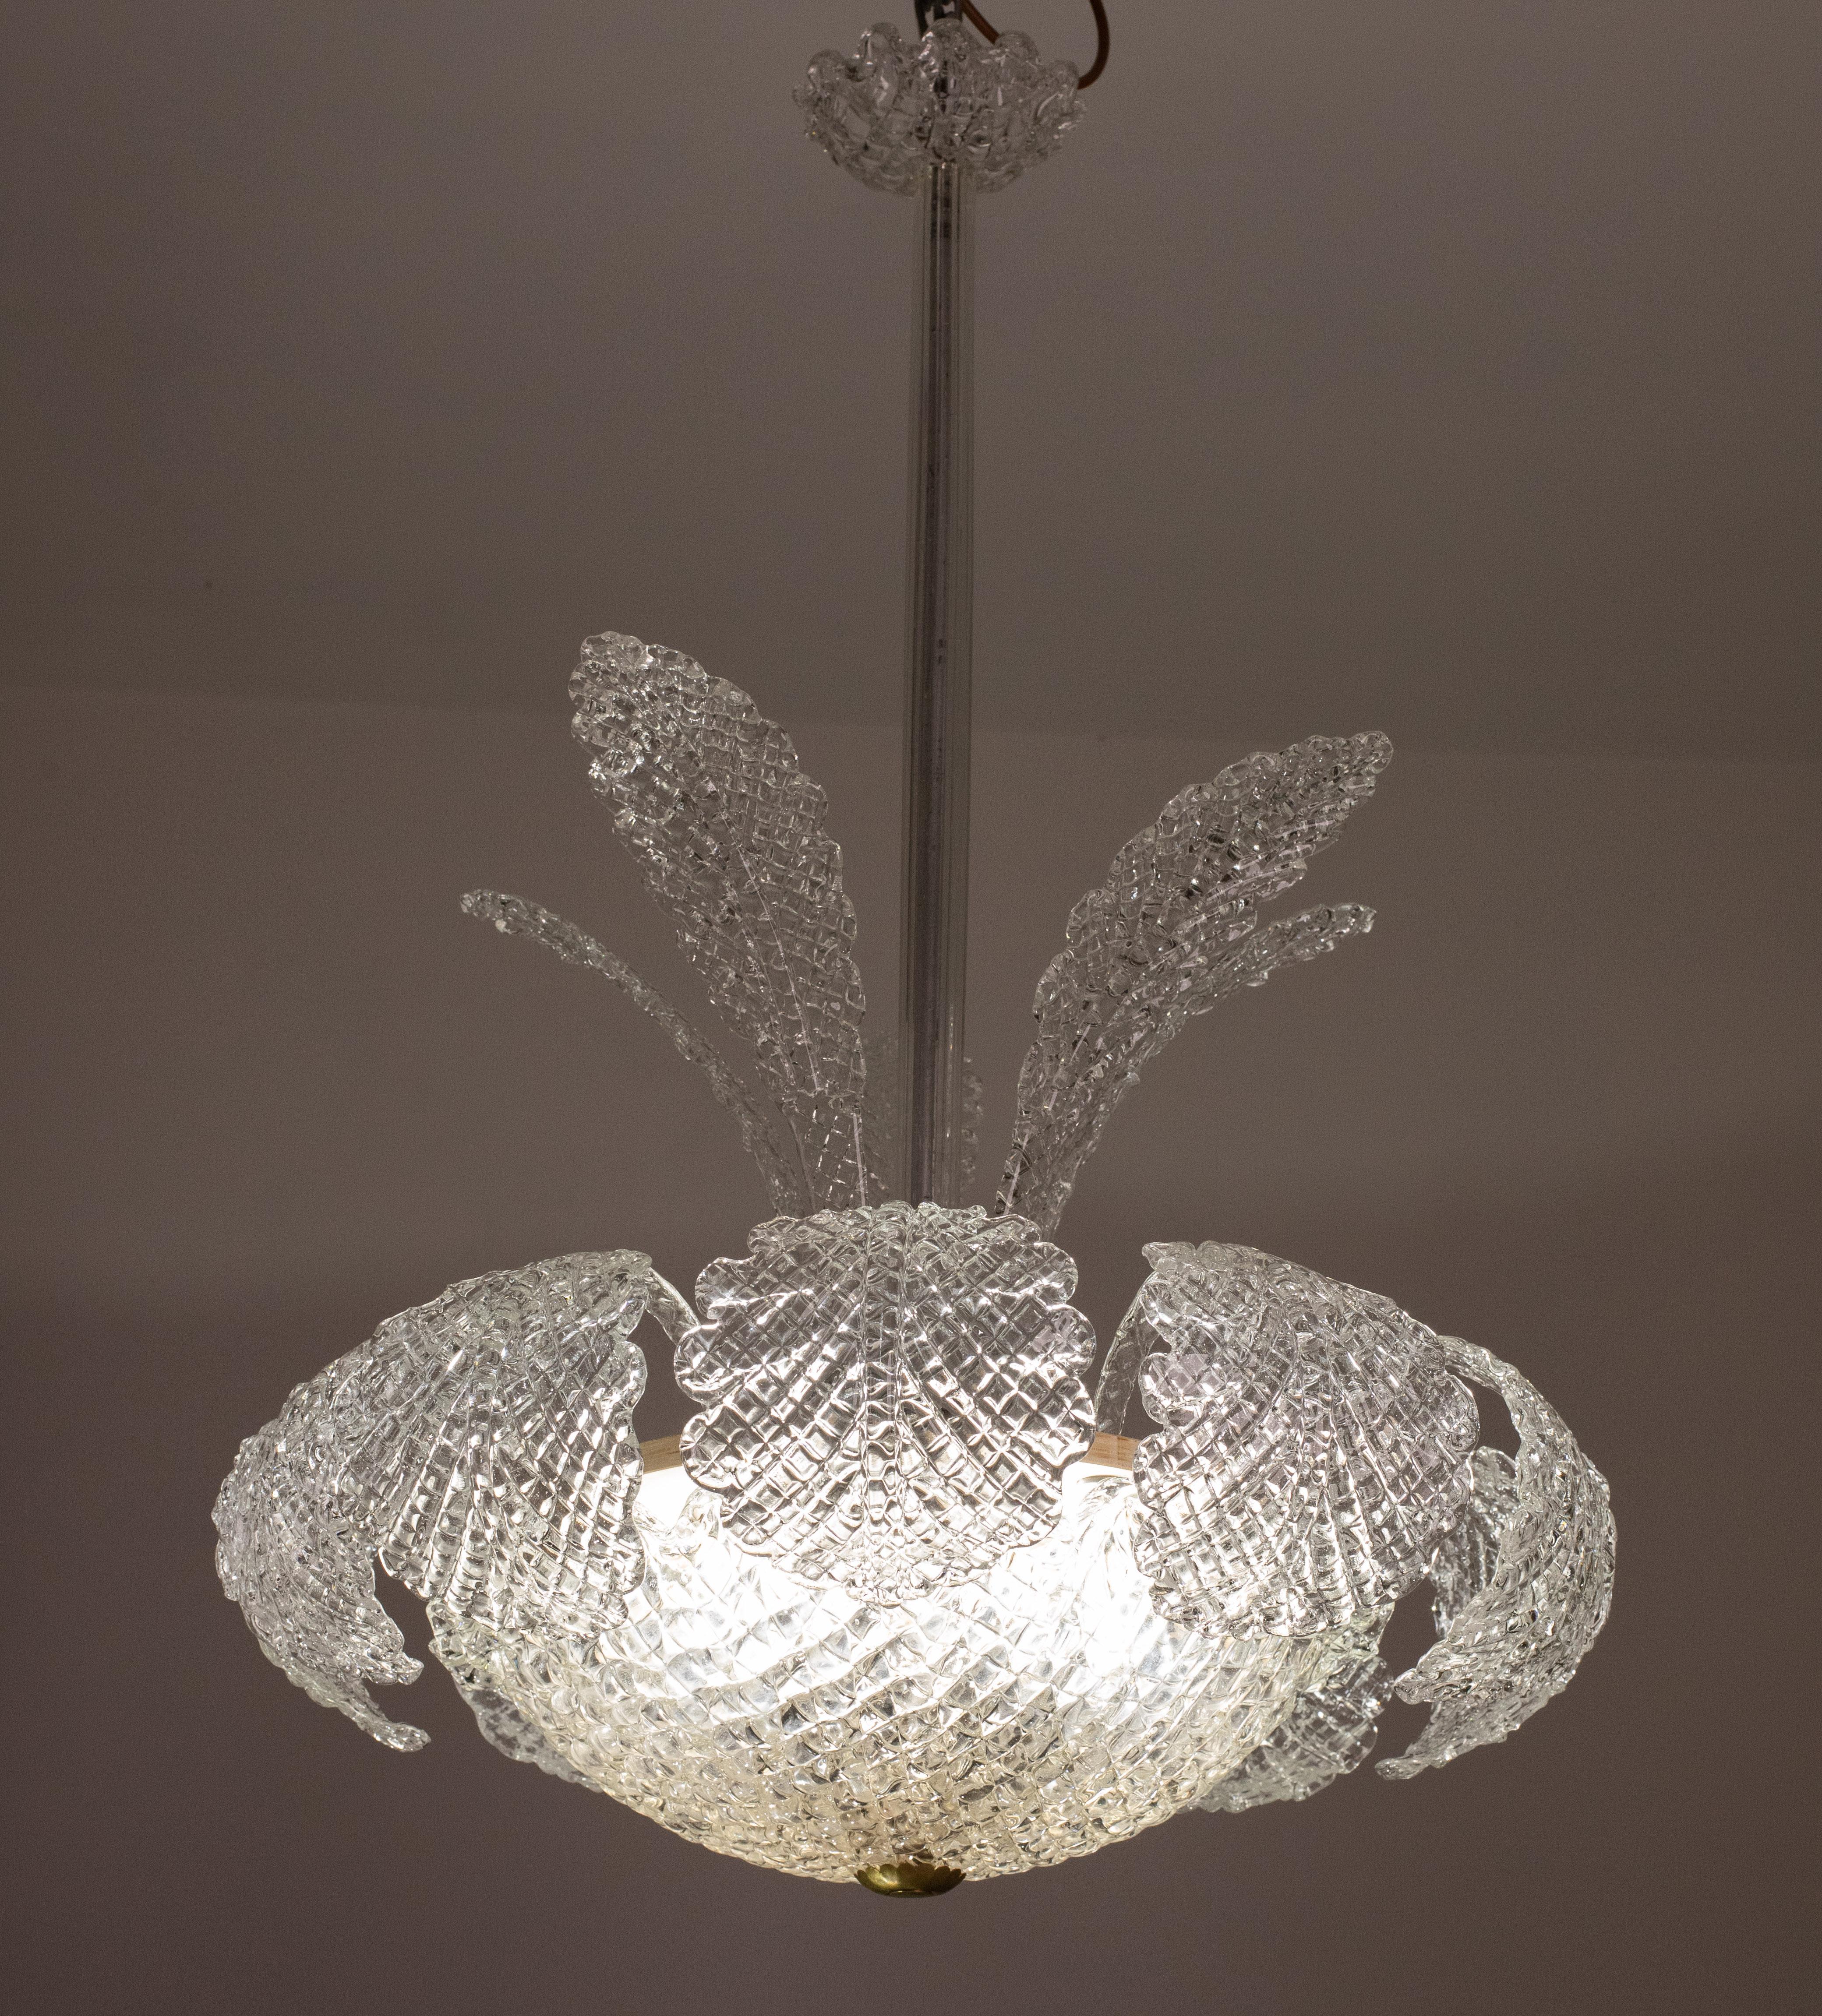 Extraordinary Art Deco chandelier made by the glassworks Barovier & Toso in the 1940s-1950s.
The chandelier is 105 centimetres high and 70 centimetres wide.
It mounts three E27 lights, possible to switch for Usa standards. The chandelier is very